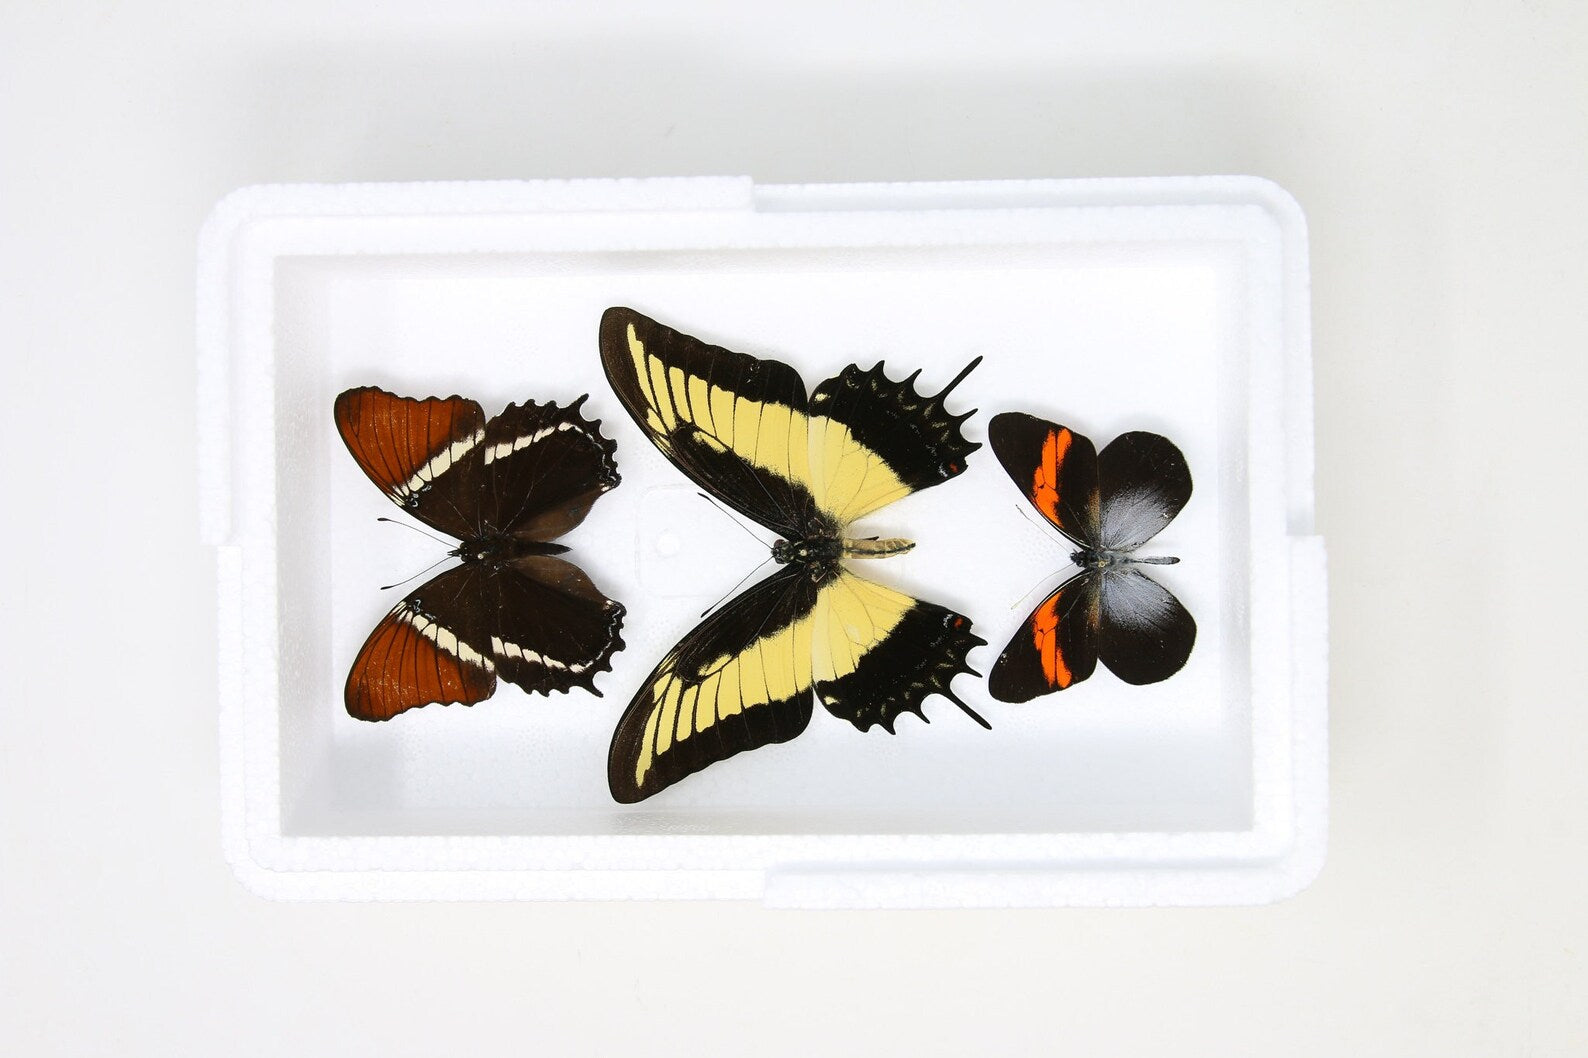 Pinned Tropical Butterflies, A1 Real Butterfly Pinned Set Specimens, Entomology Taxidermy (#BUT72)